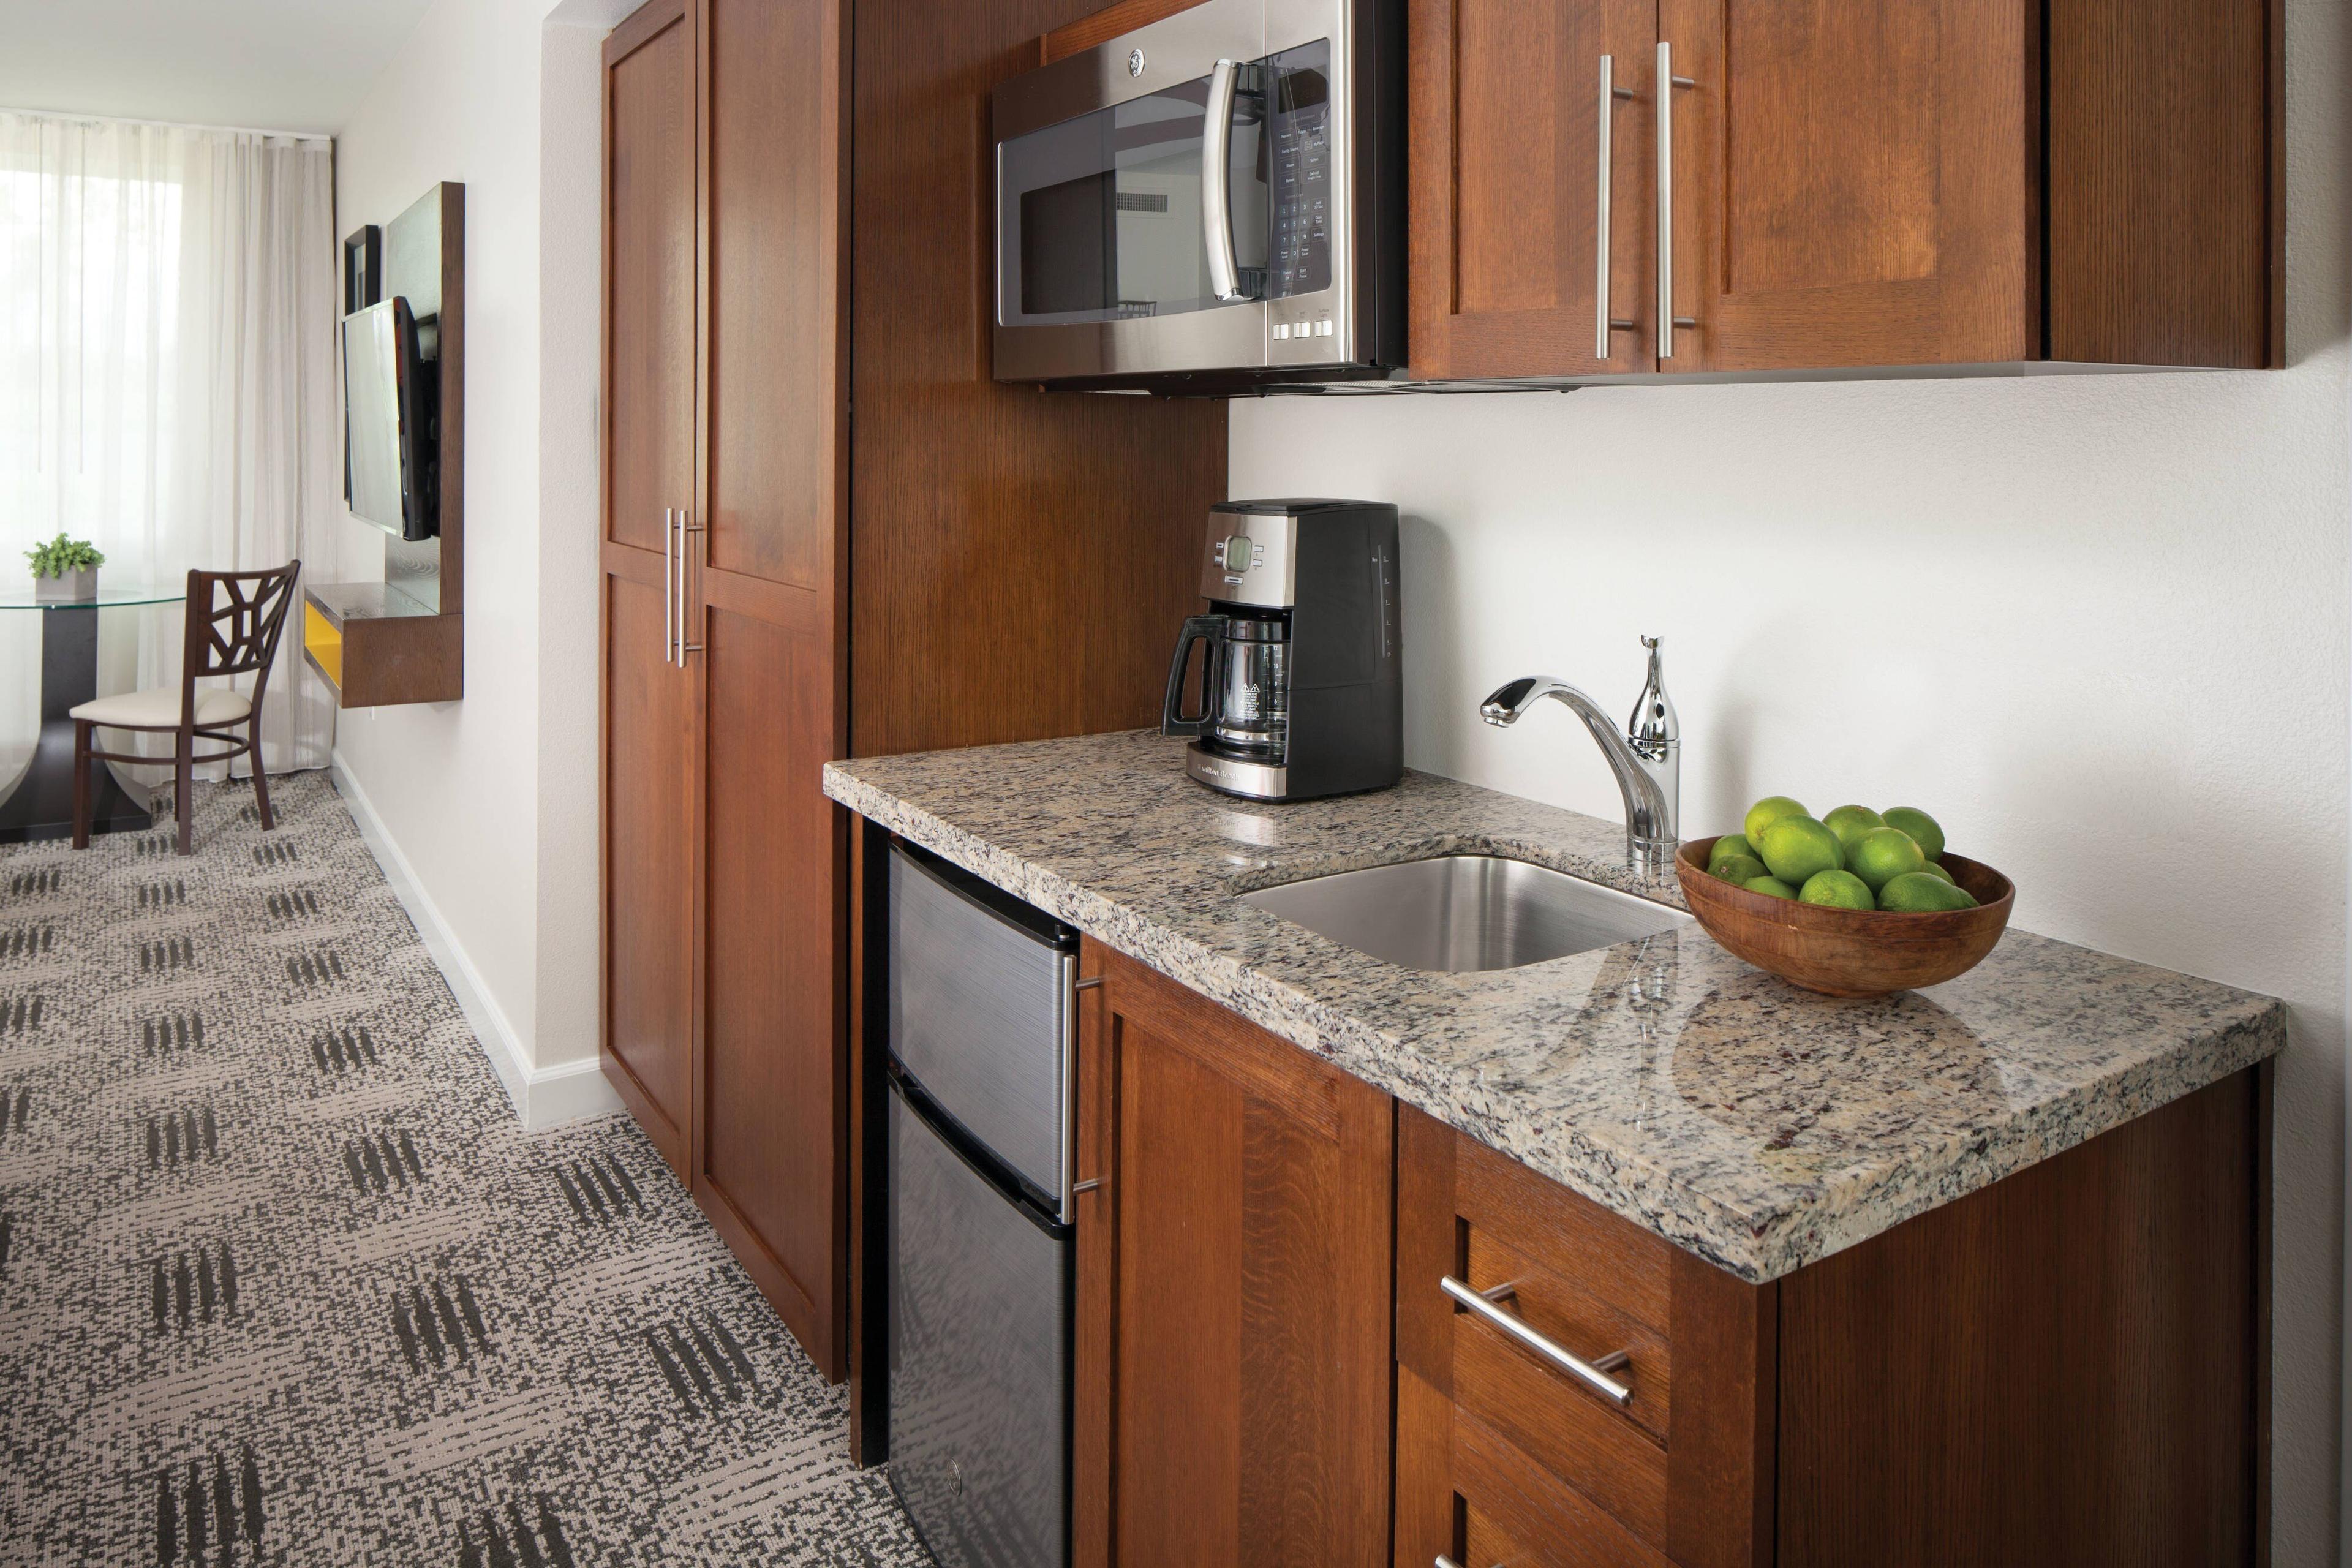 The comfortable guest room features a kitchenette with a mini-refrigerator, a microwave, a coffee maker and dishes.